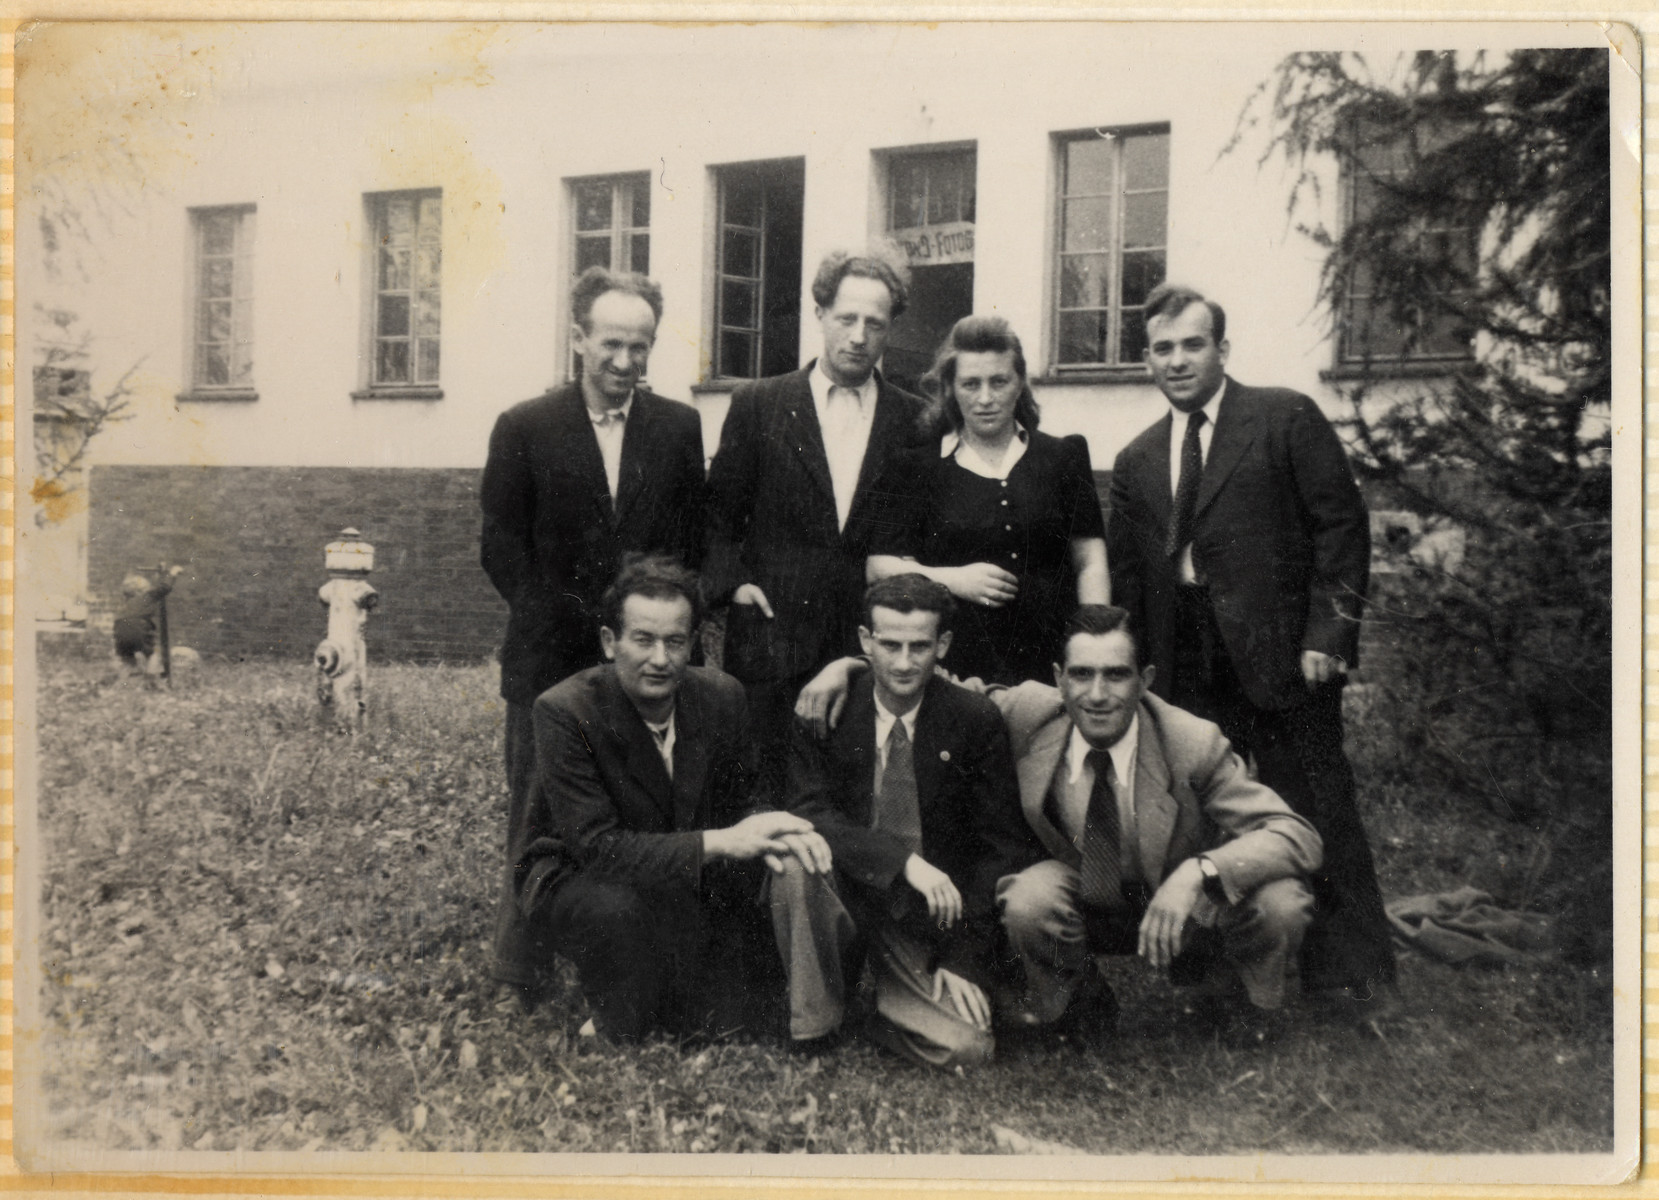 A group of Jewish DPs pose together in the Hofgeismar displaced persons camp.

Emil Kohl is pictured at the bottom left.